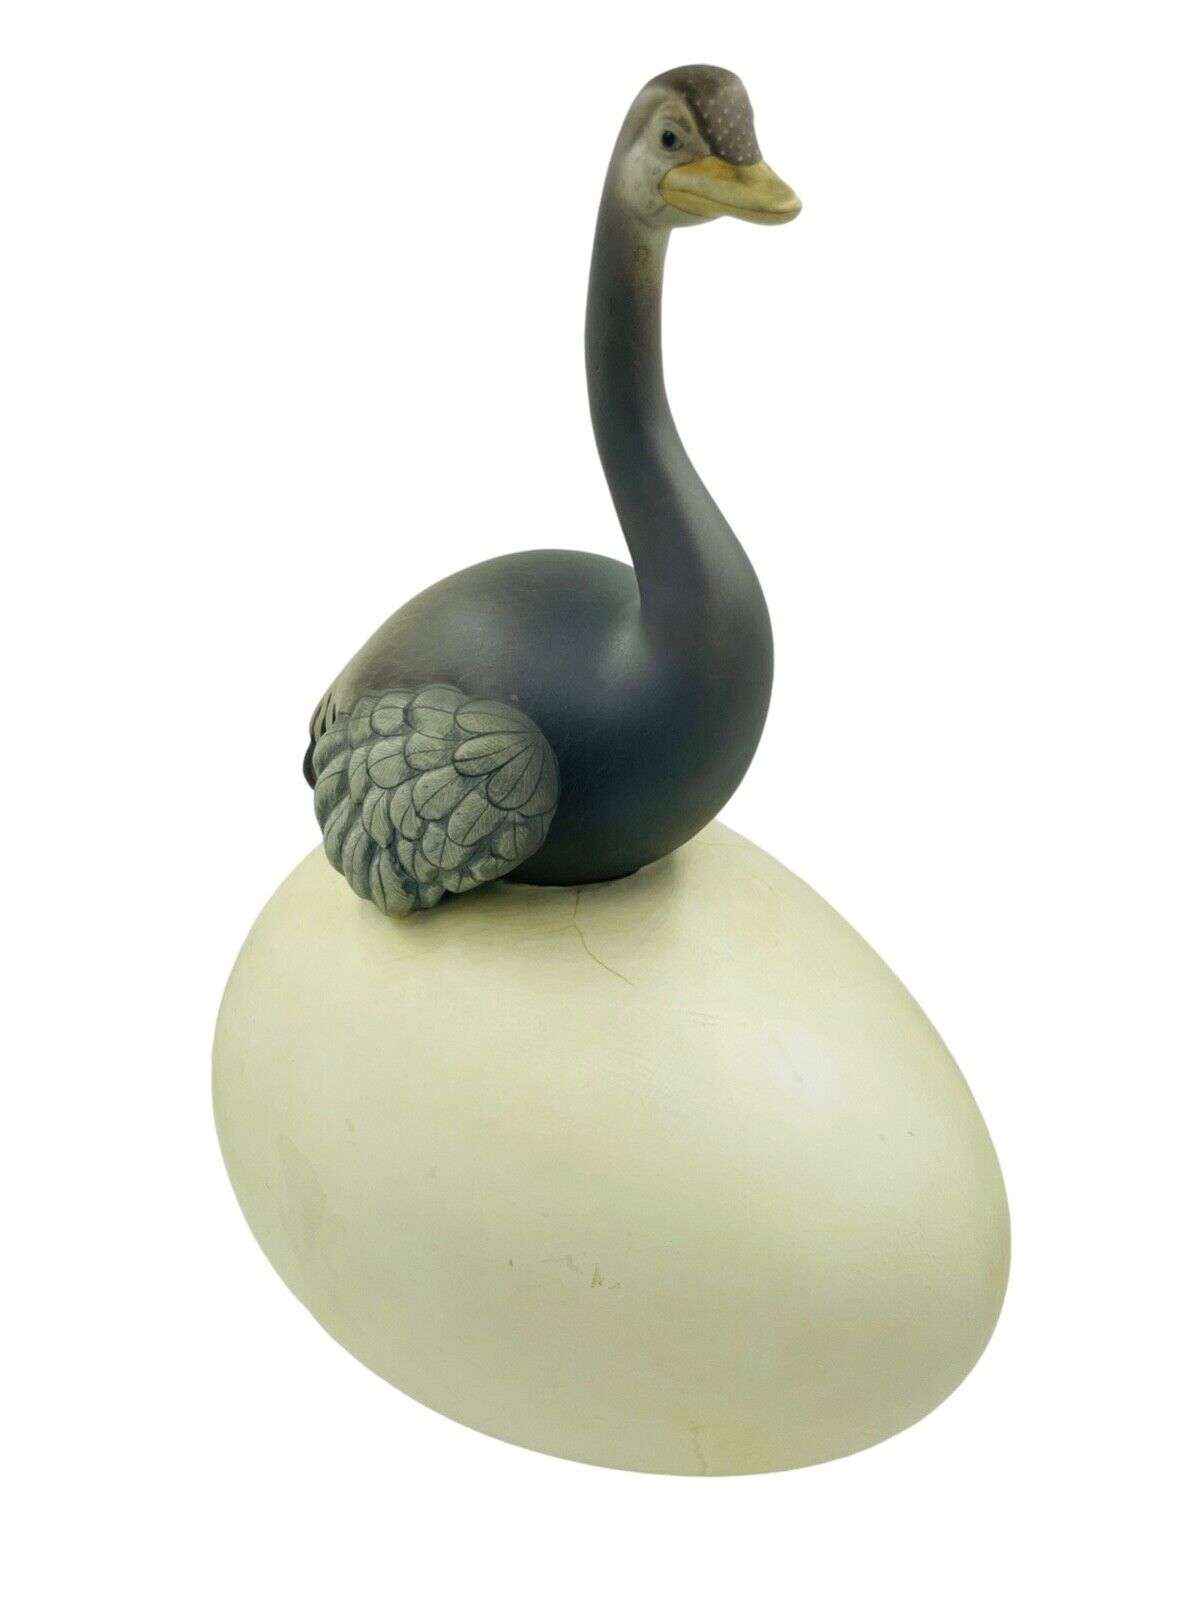 Sergio Bustamante Ostrich in Egg  Signed Mexican Artist Sculpture